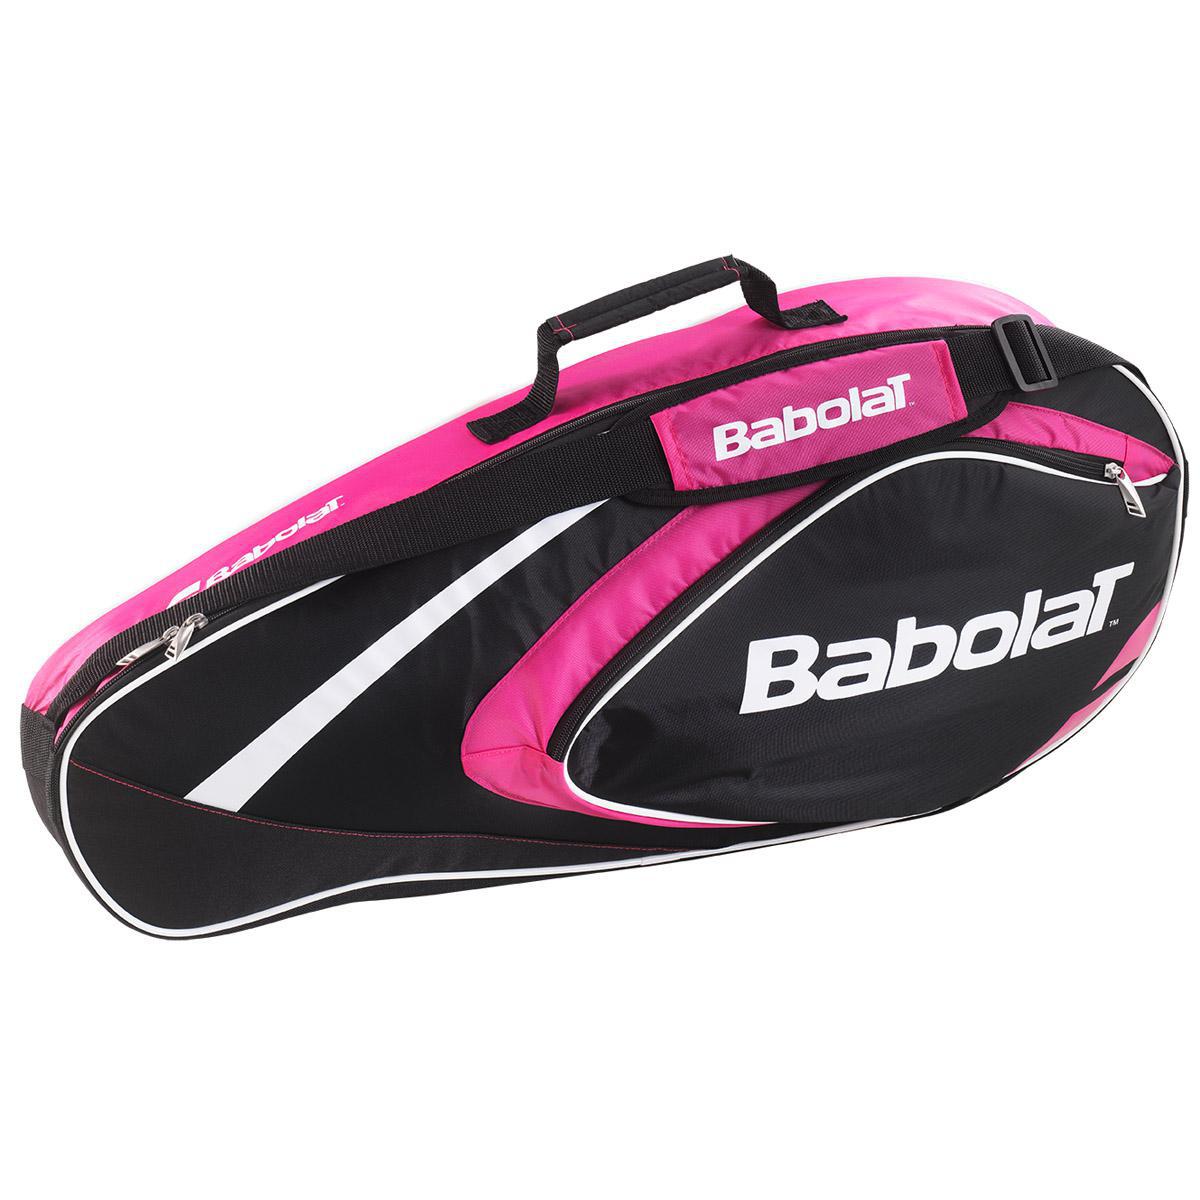 PINK BABOLAT CLUBLINE 3 RACKET TENNIS BAG , IDEAL FOR TRAVEL , PADEL TENNIS